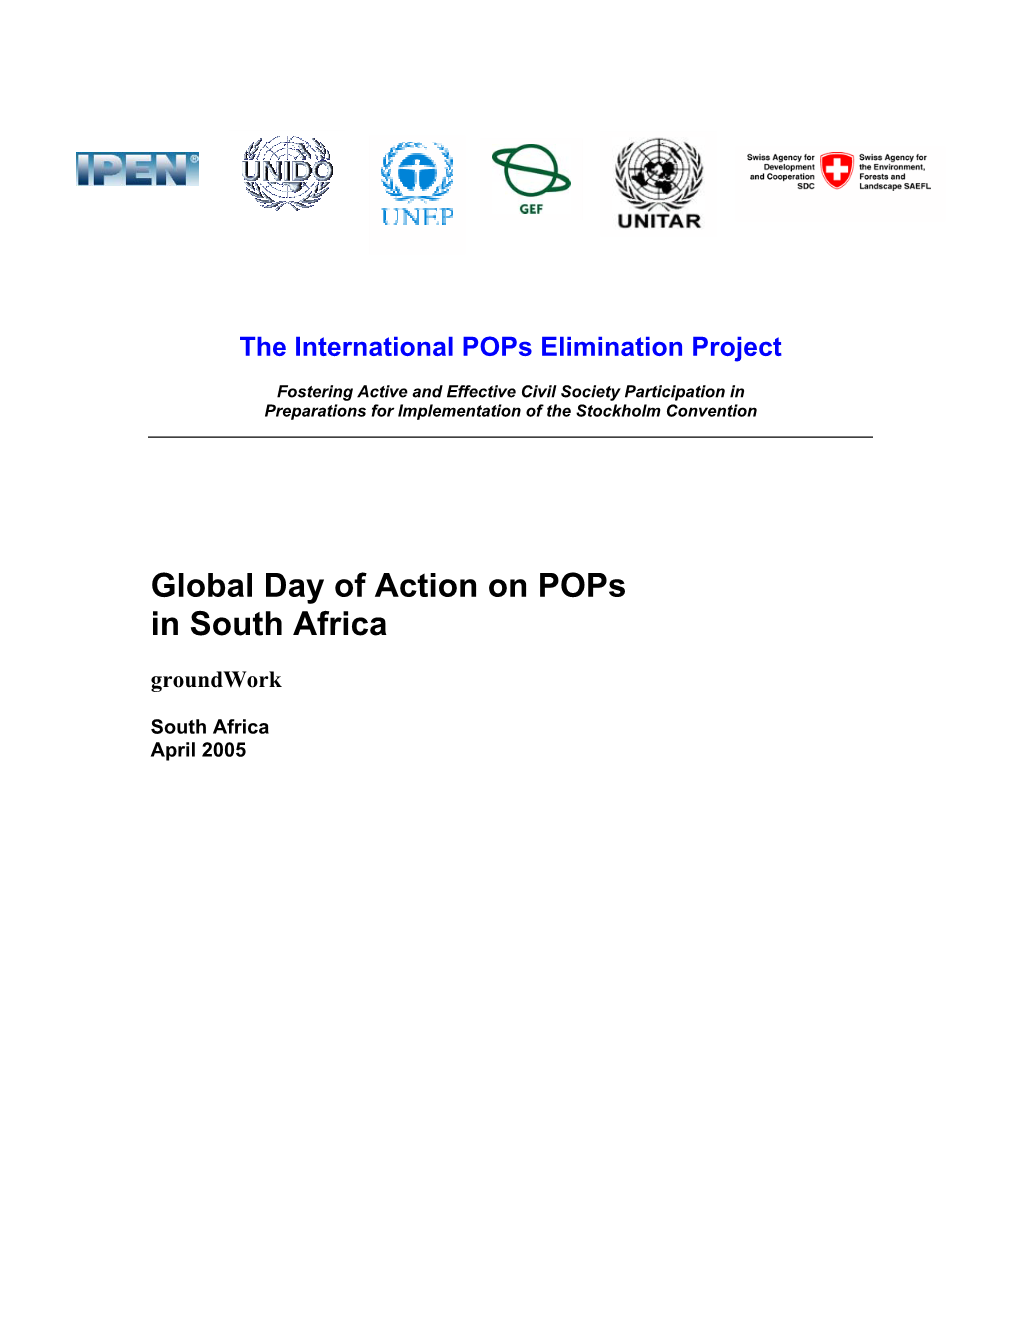 Global Day of Action on Pops in South Africa Groundwork